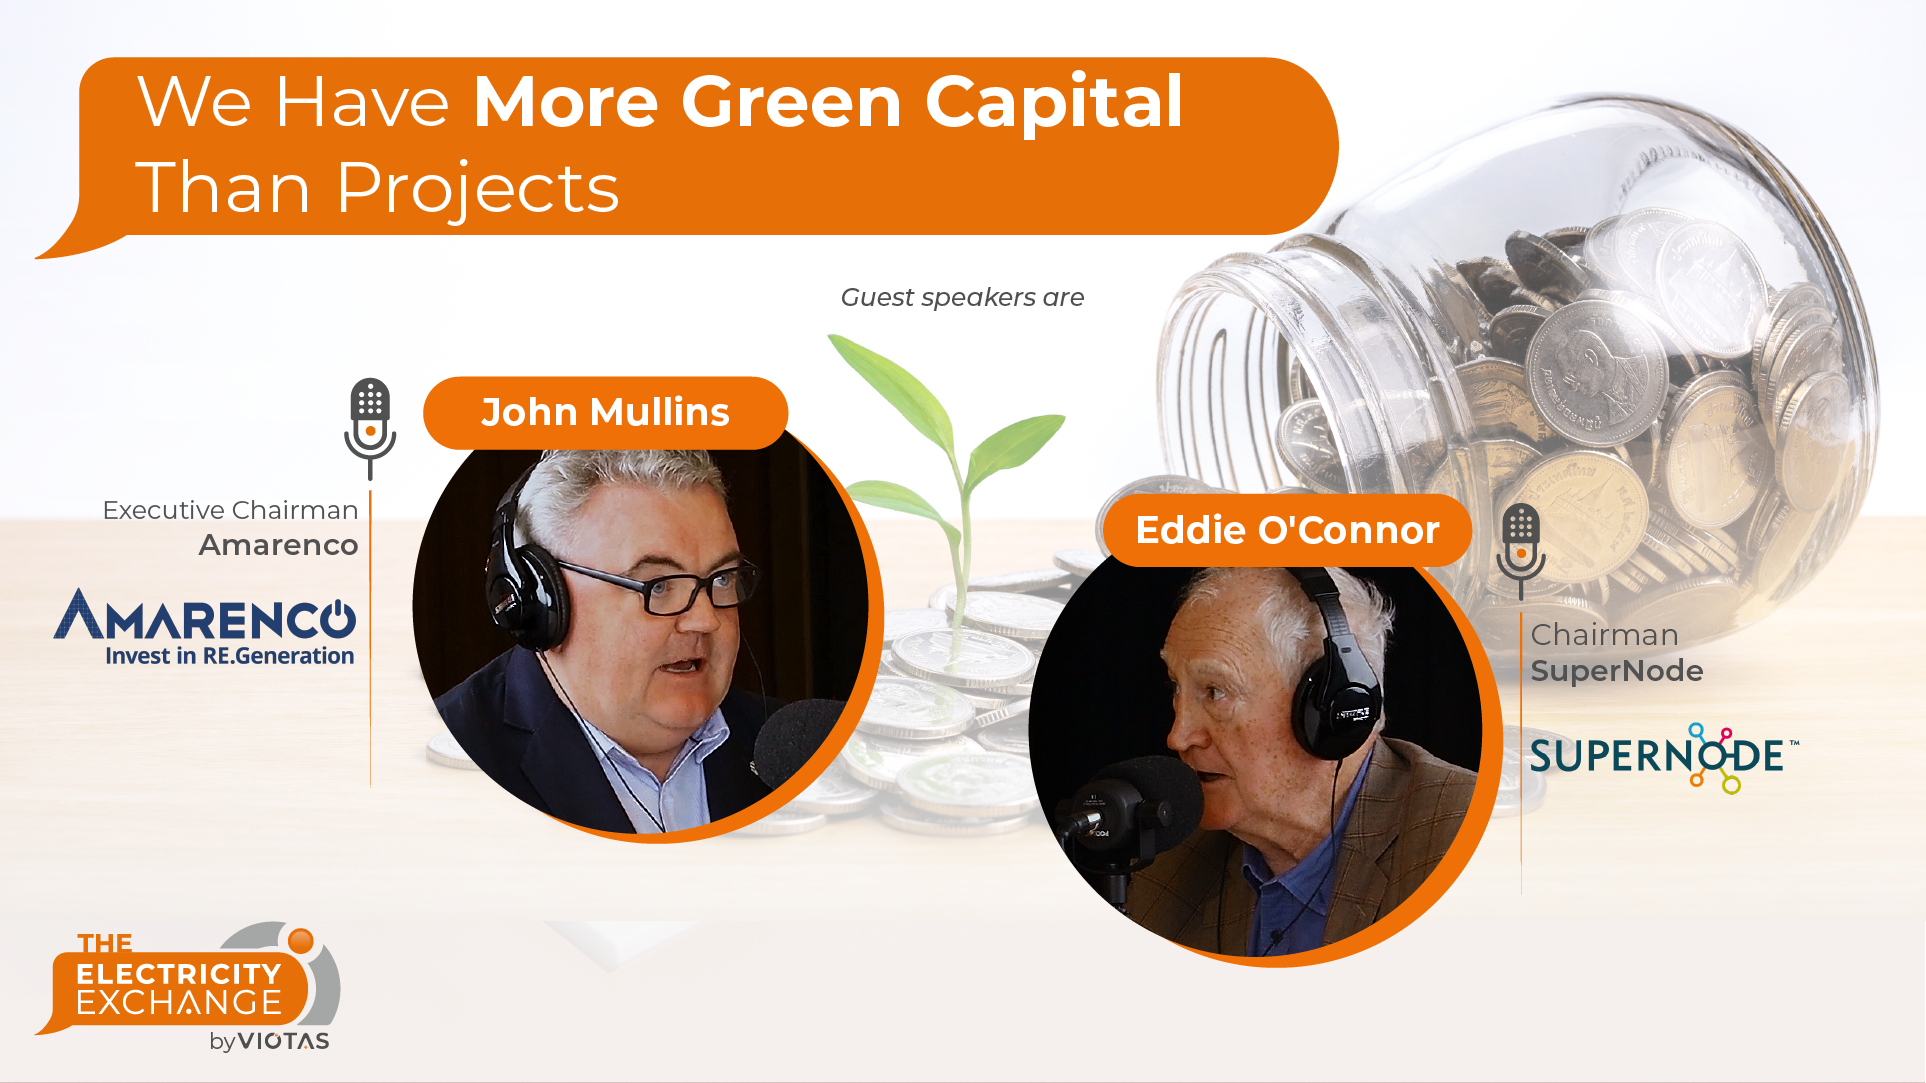 We Have More Green Capital Than Projects